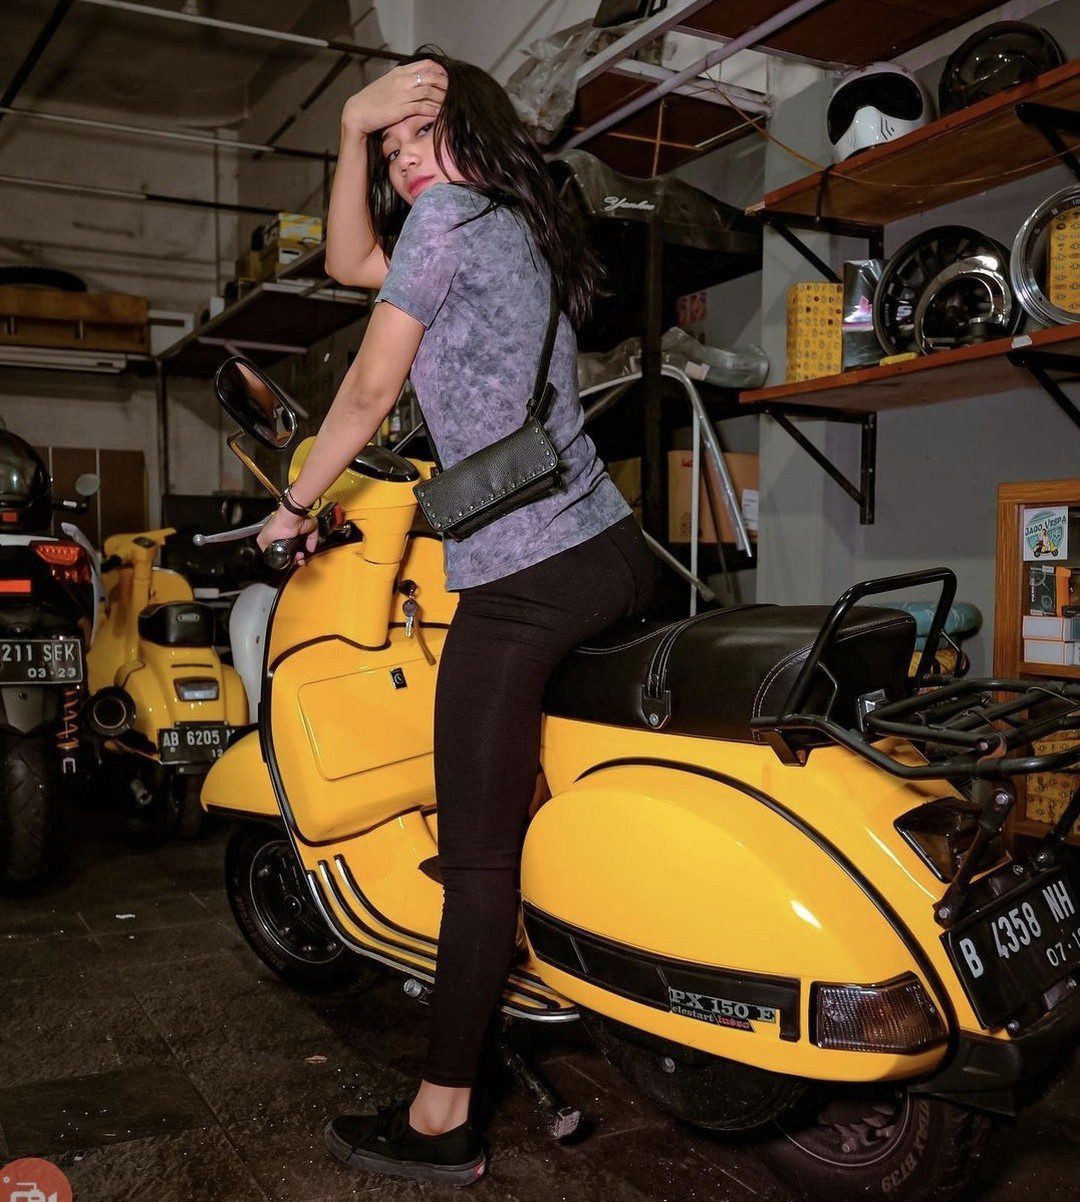 Vespa girl on yellow Vespa PX classic

Hashtag and mention @vespapxnet for feature repost
Check website www.vespapx.net for more 

@dnrmaharani